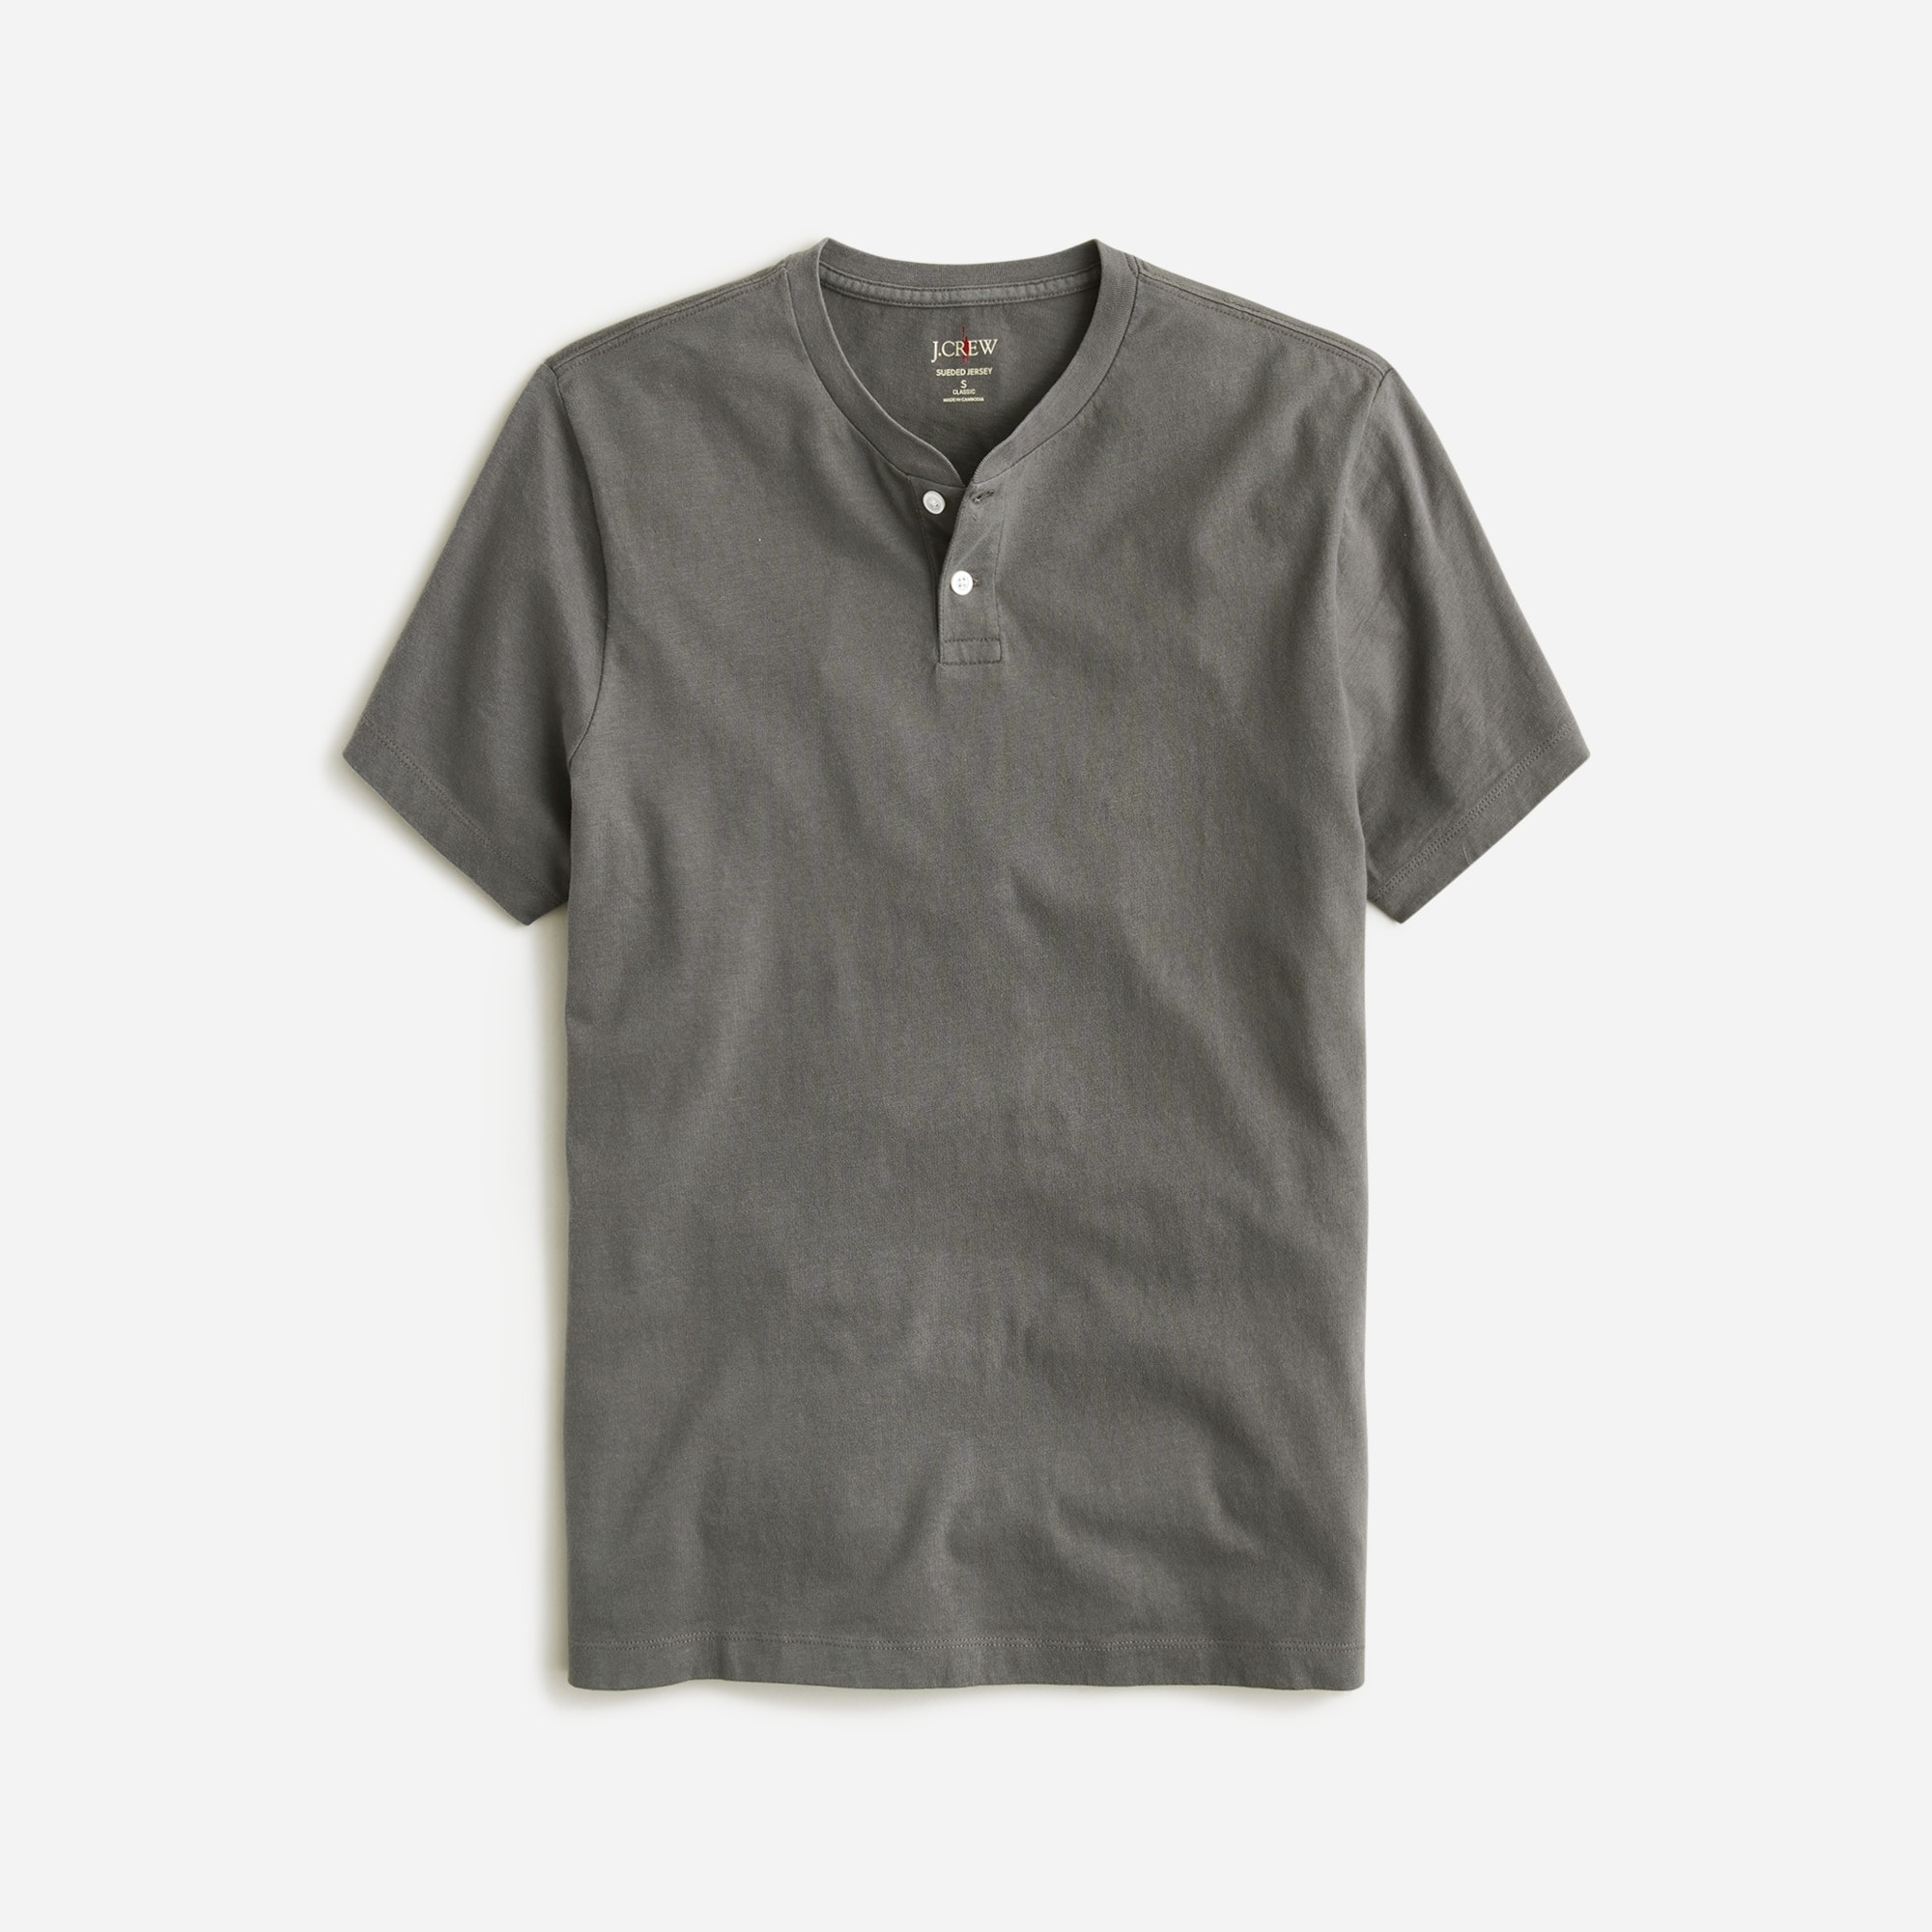 mens Tall short-sleeve sueded cotton henley